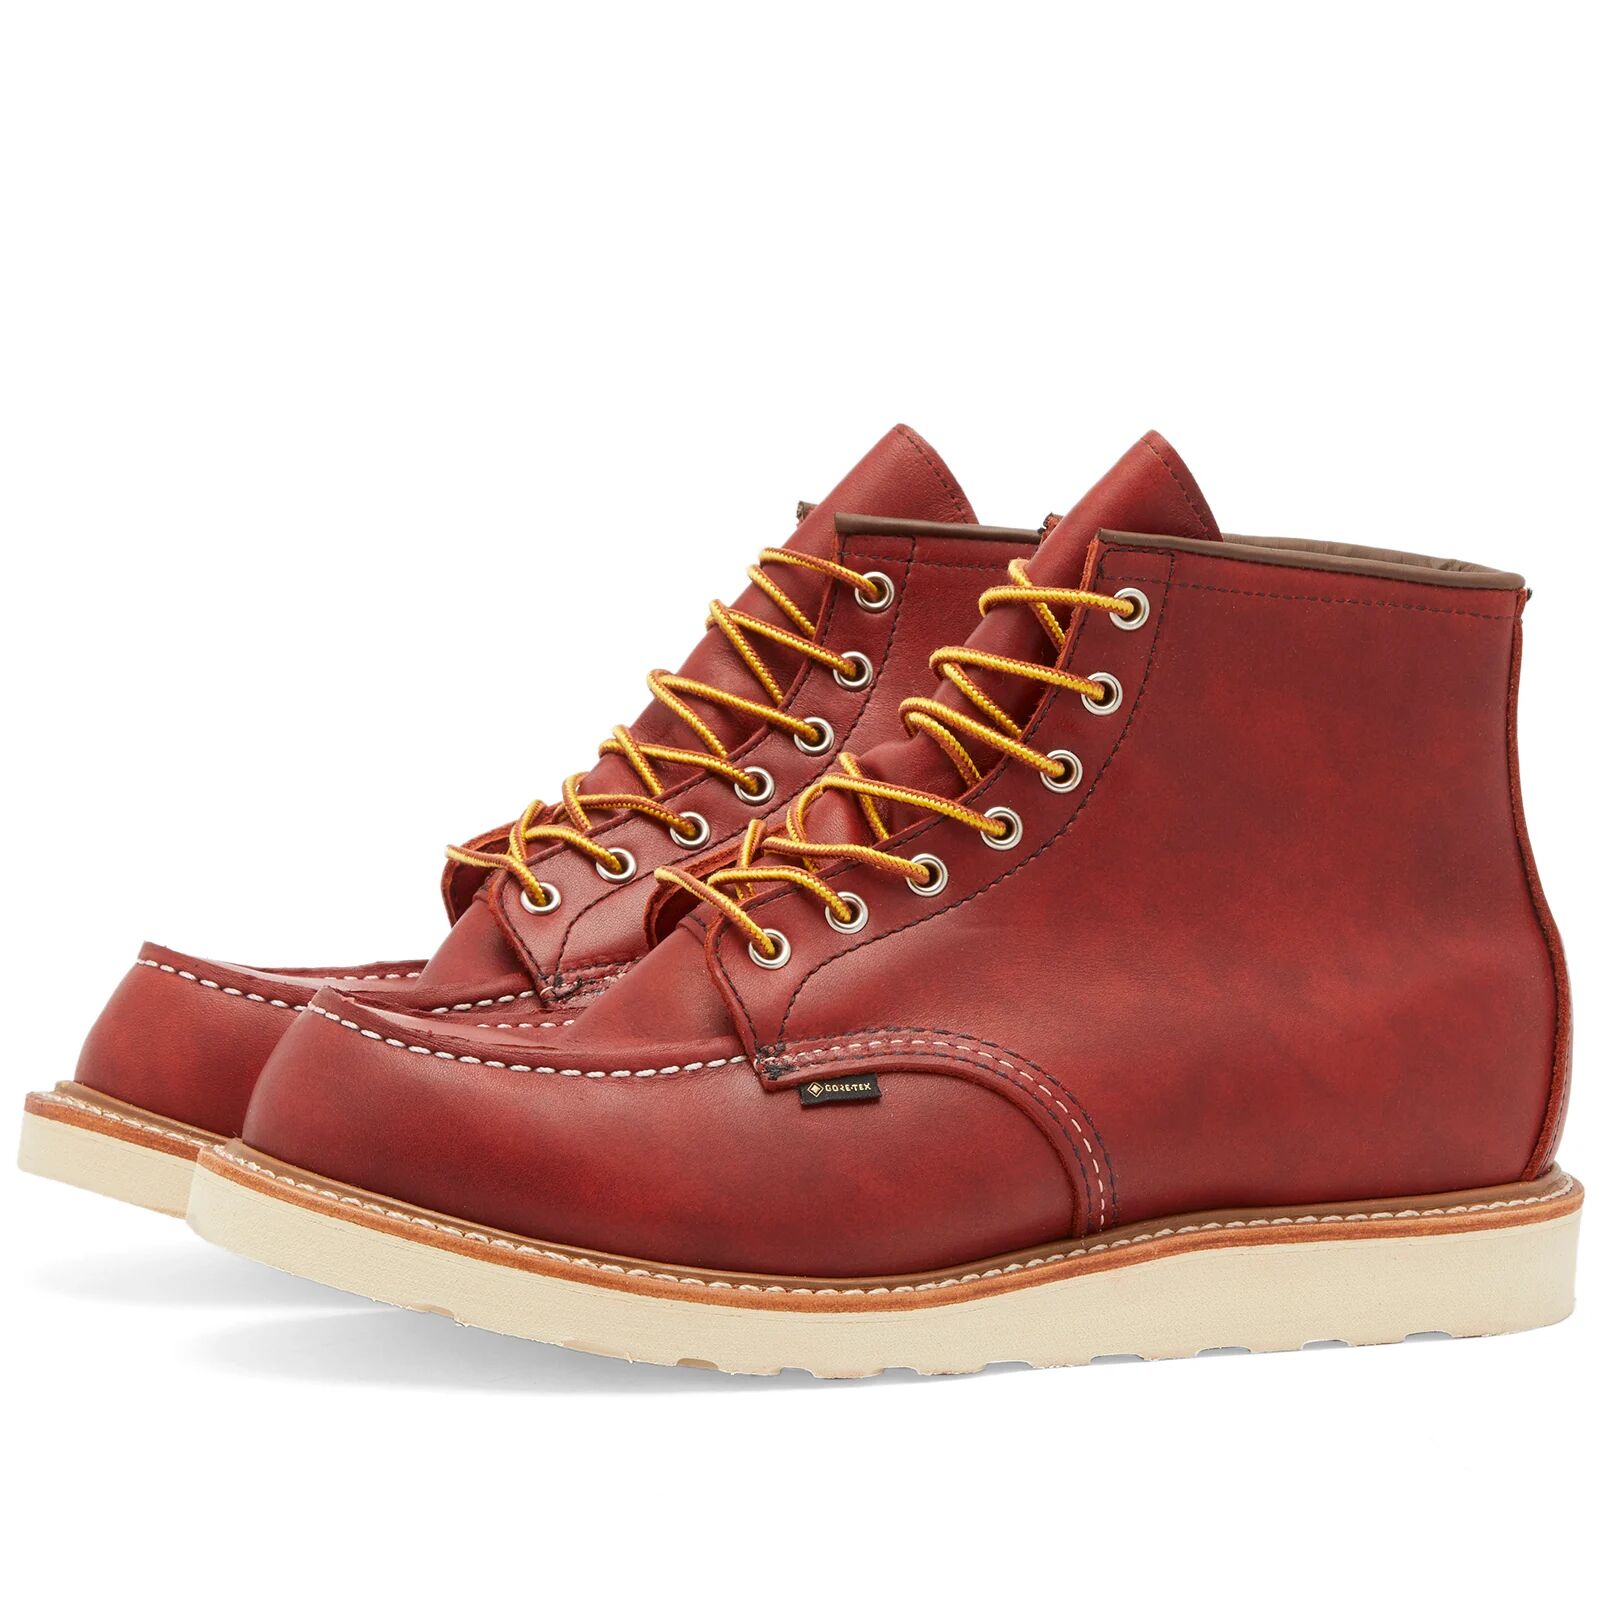 Red Wing Men's 8864 Heritage Work 6" Moc Toe Gore-Tex Boot in Russet Taos, Size UK 11